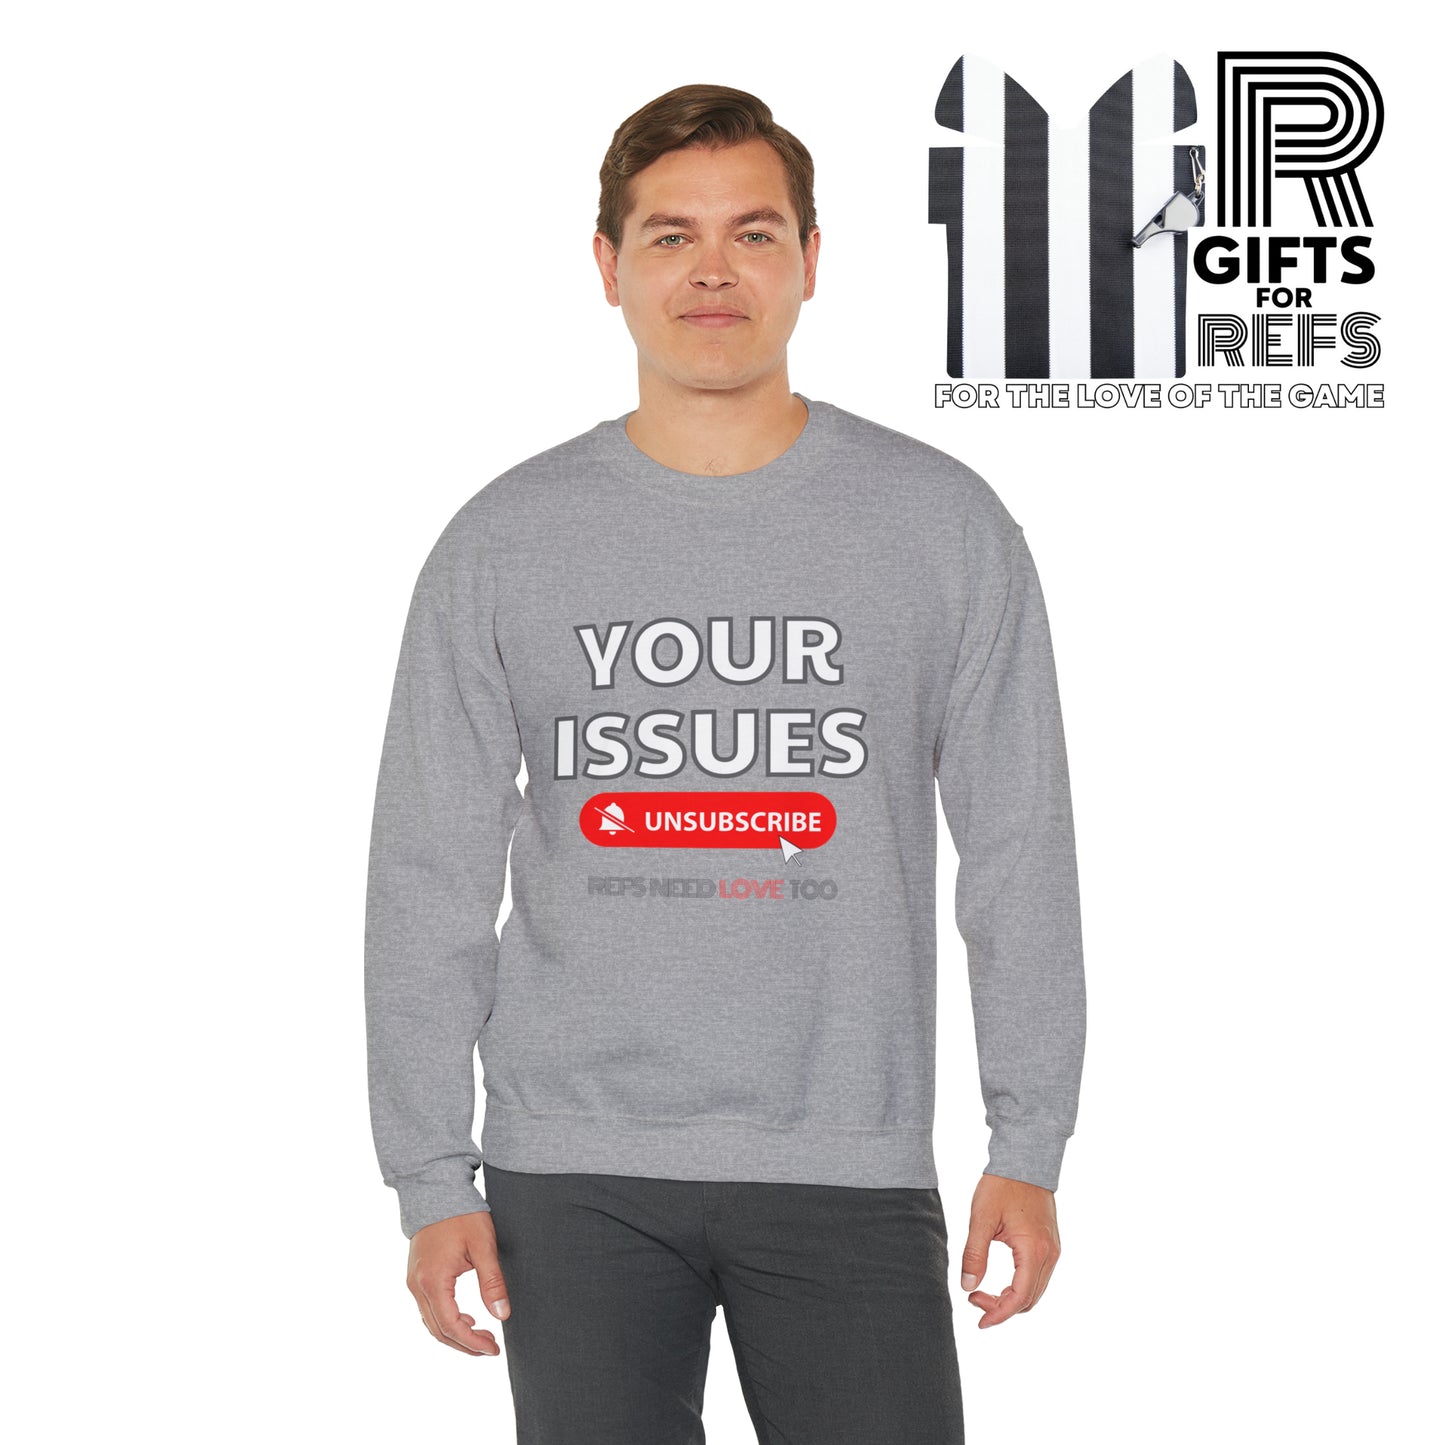 Unsubscribe to Your Issues Unisex Heavy Crewneck Sweatshirt | Gifts For Referees | For Sports officials